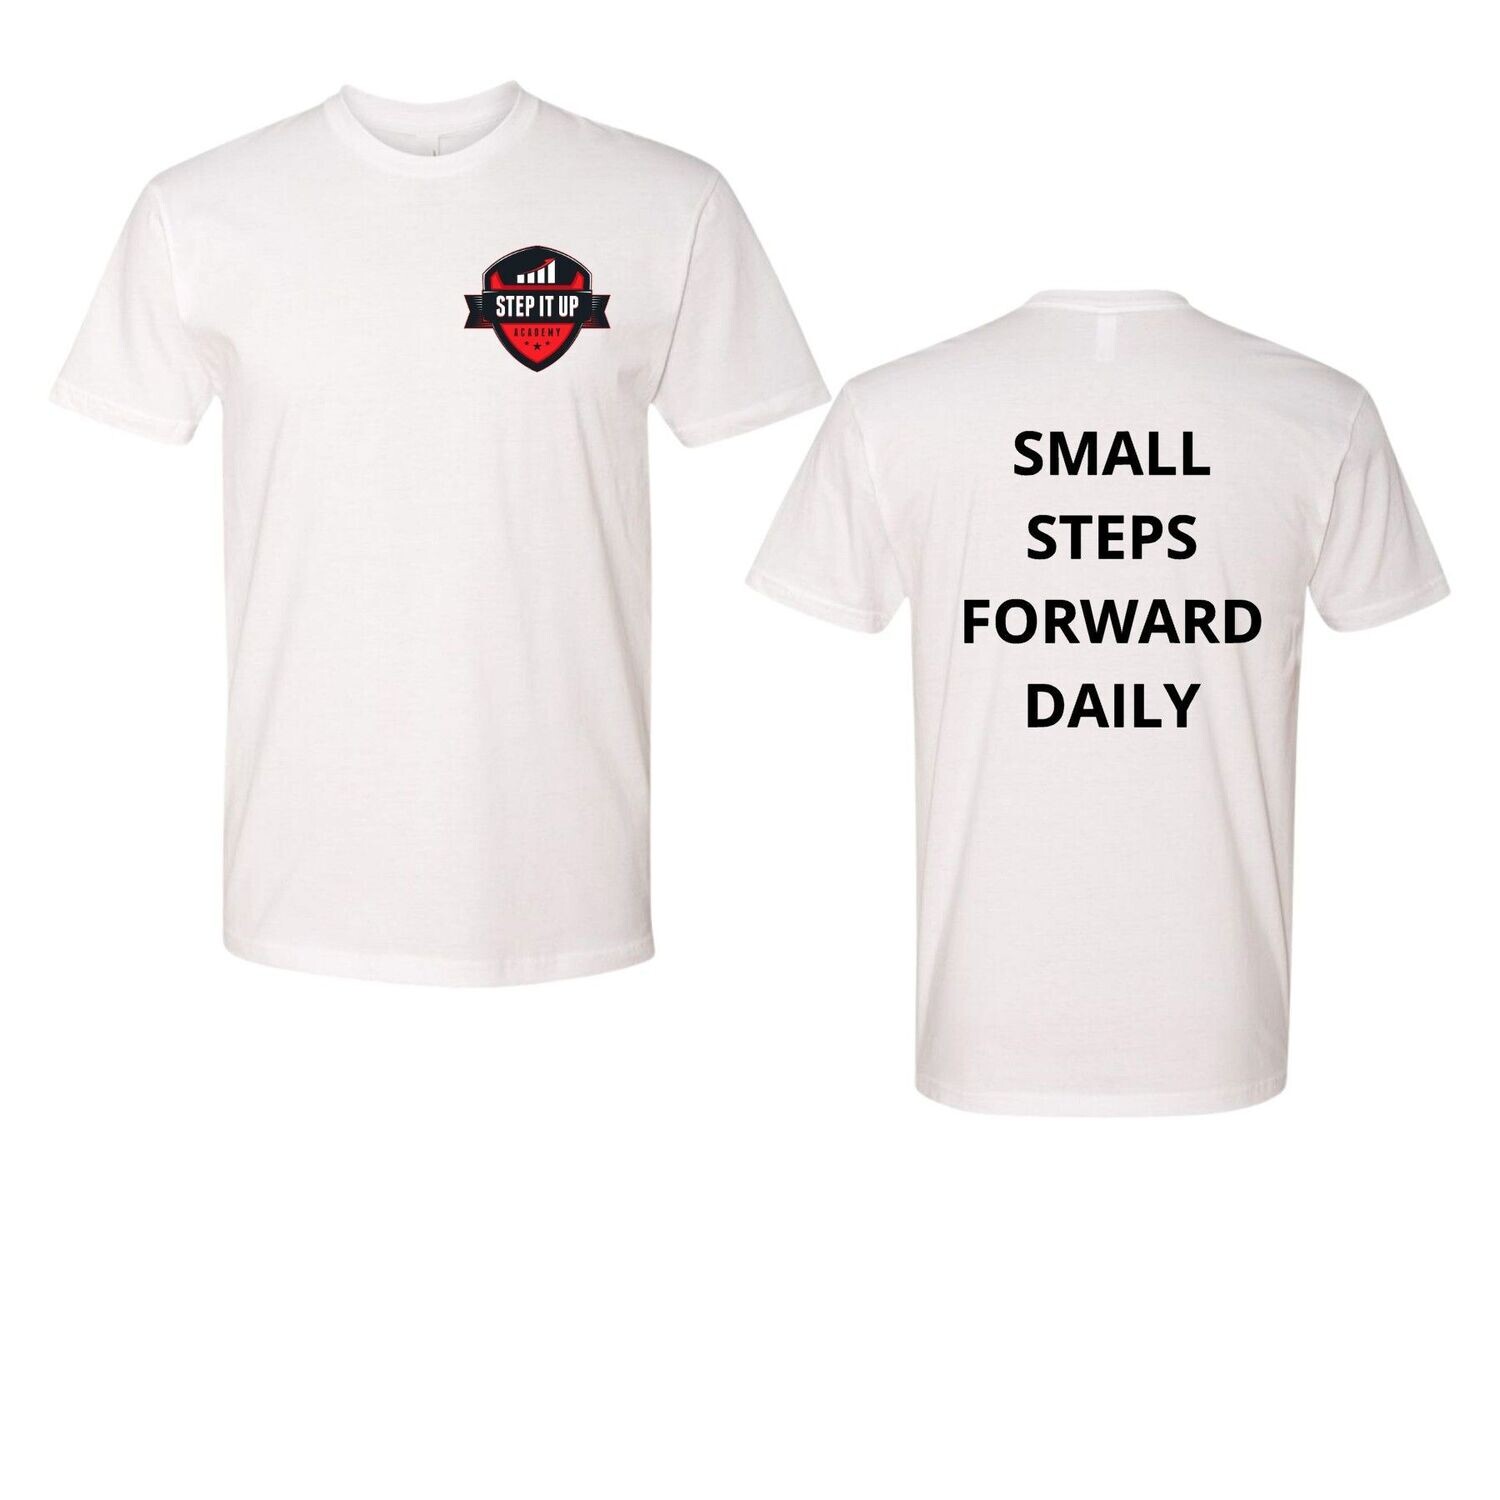 SIUP STFD / Small Steps Forward Daily Tee - White